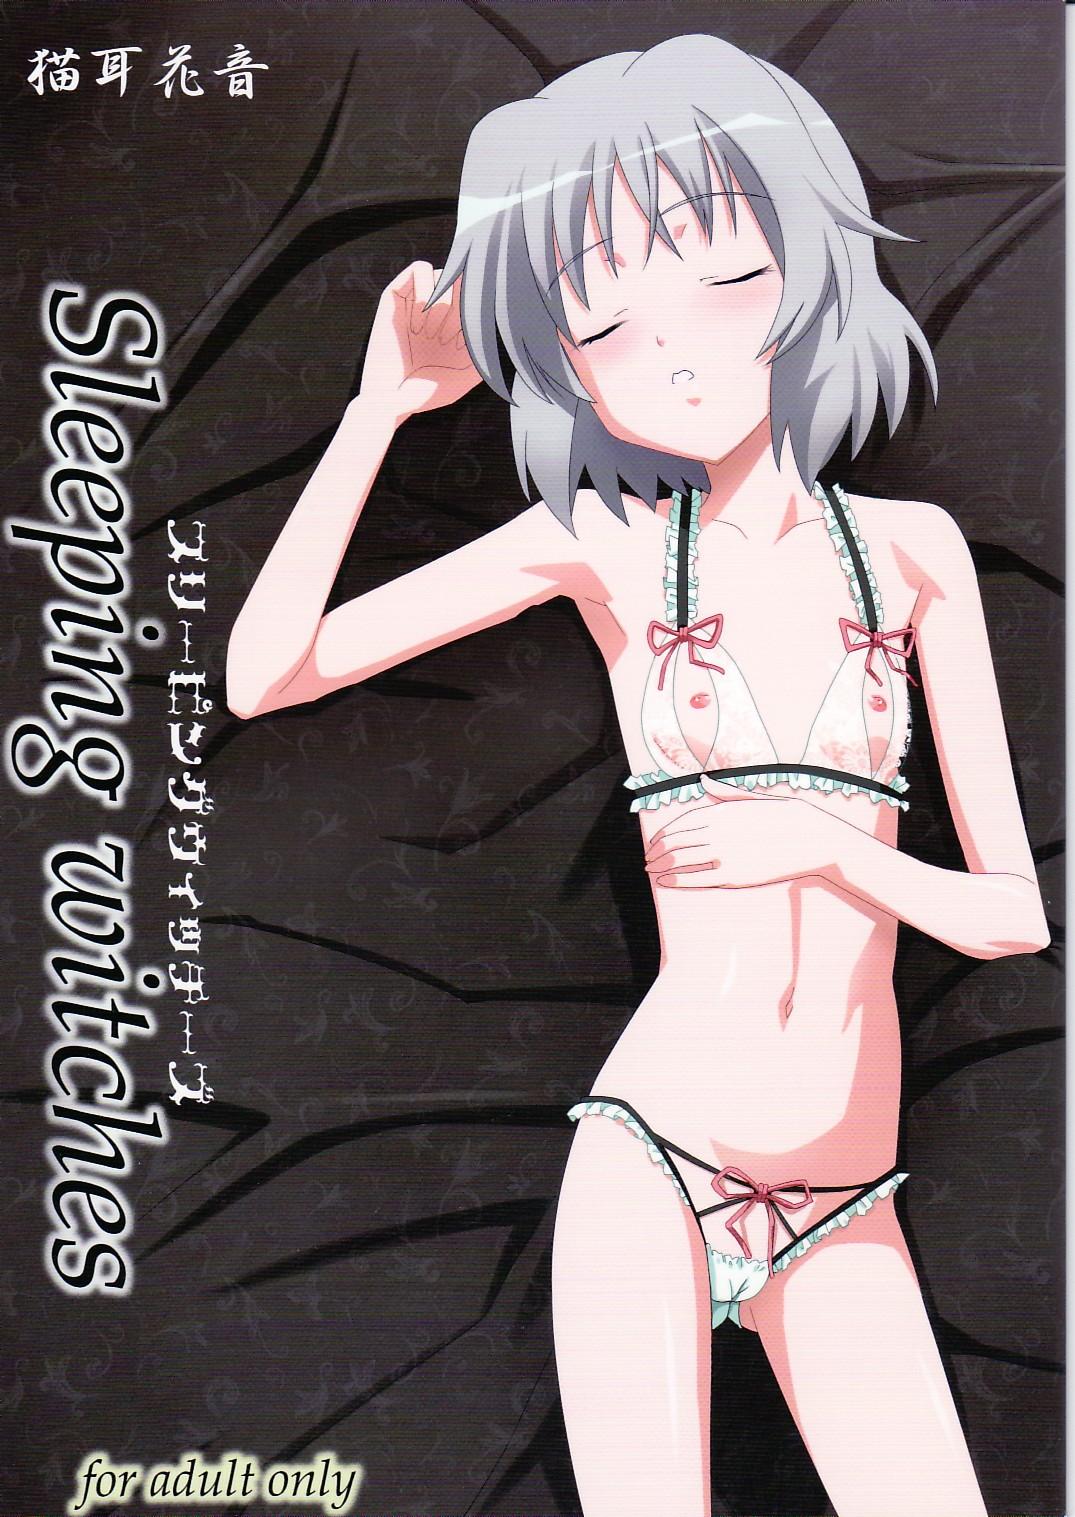 Dirty Sleeping witches - Strike witches Gostosas - Picture 1